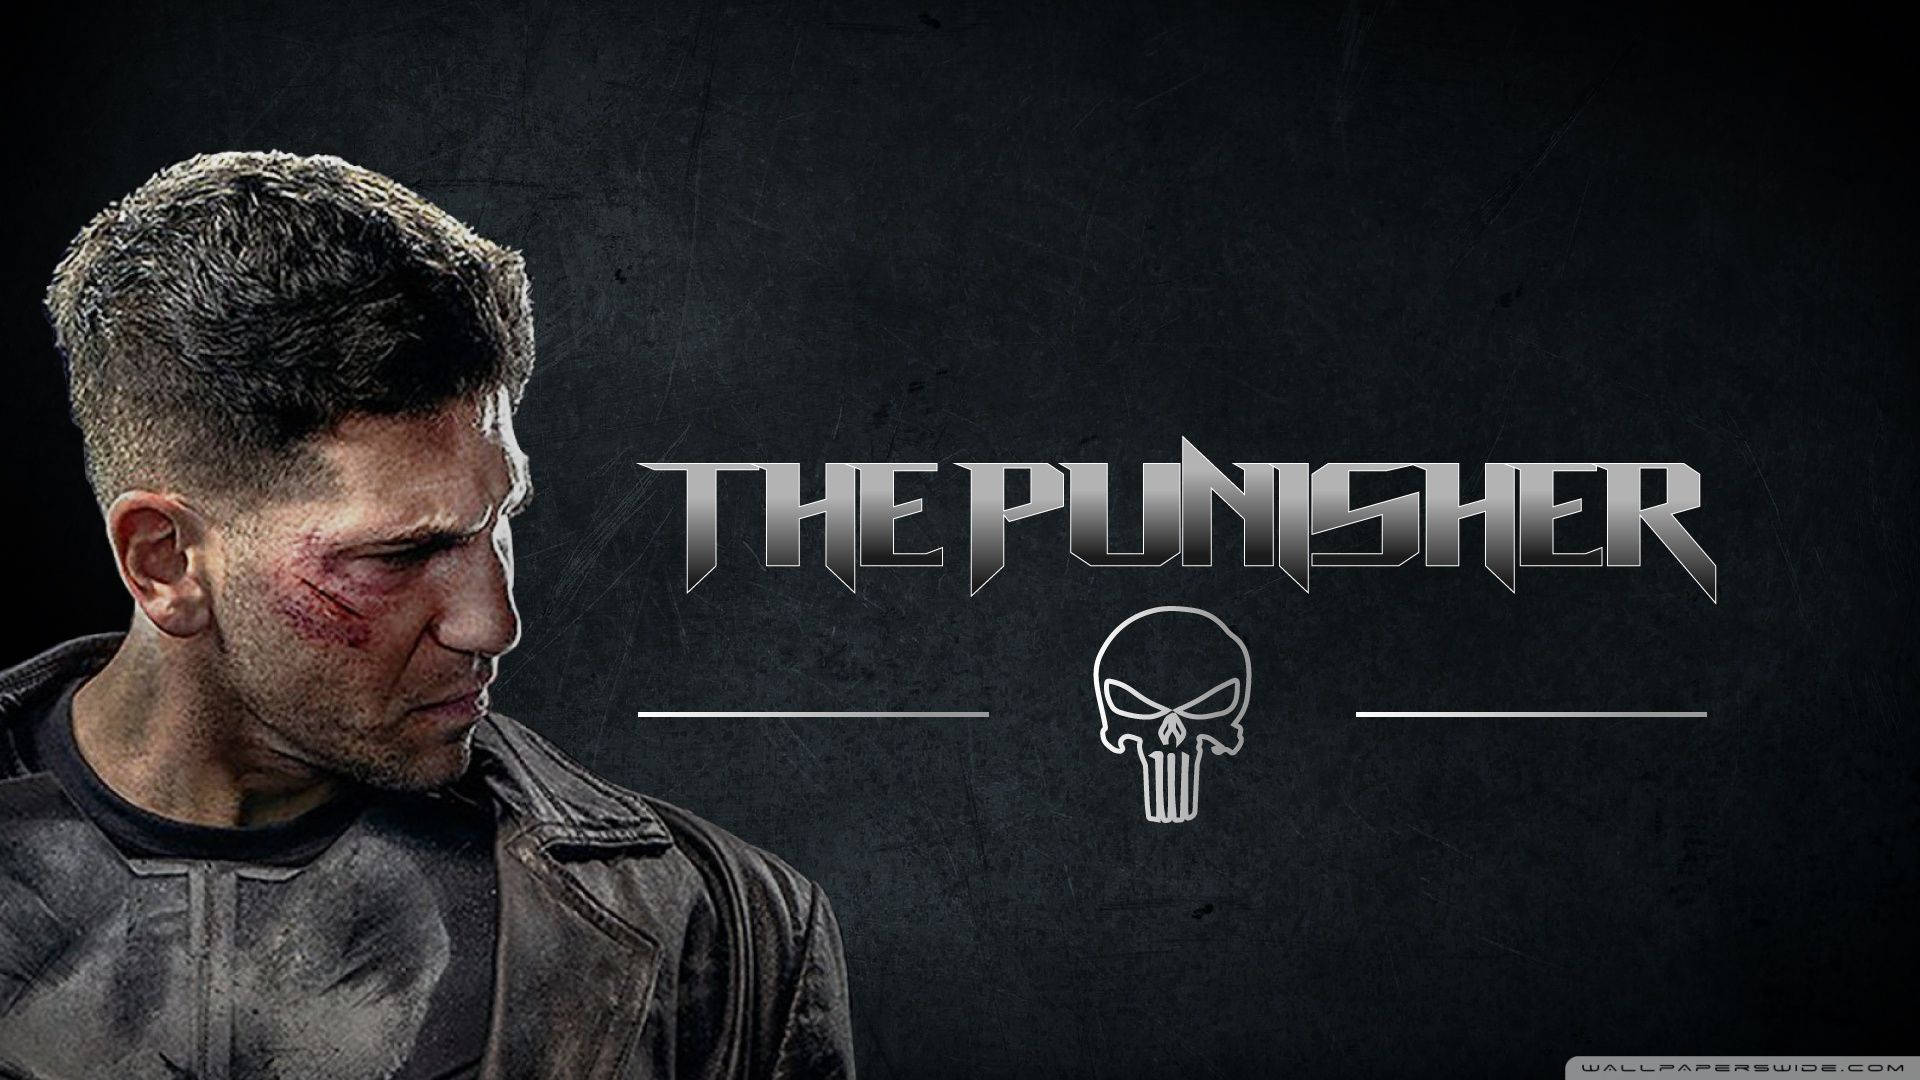 The Punisher, a Vigilante on a Quest for Justice Wallpaper